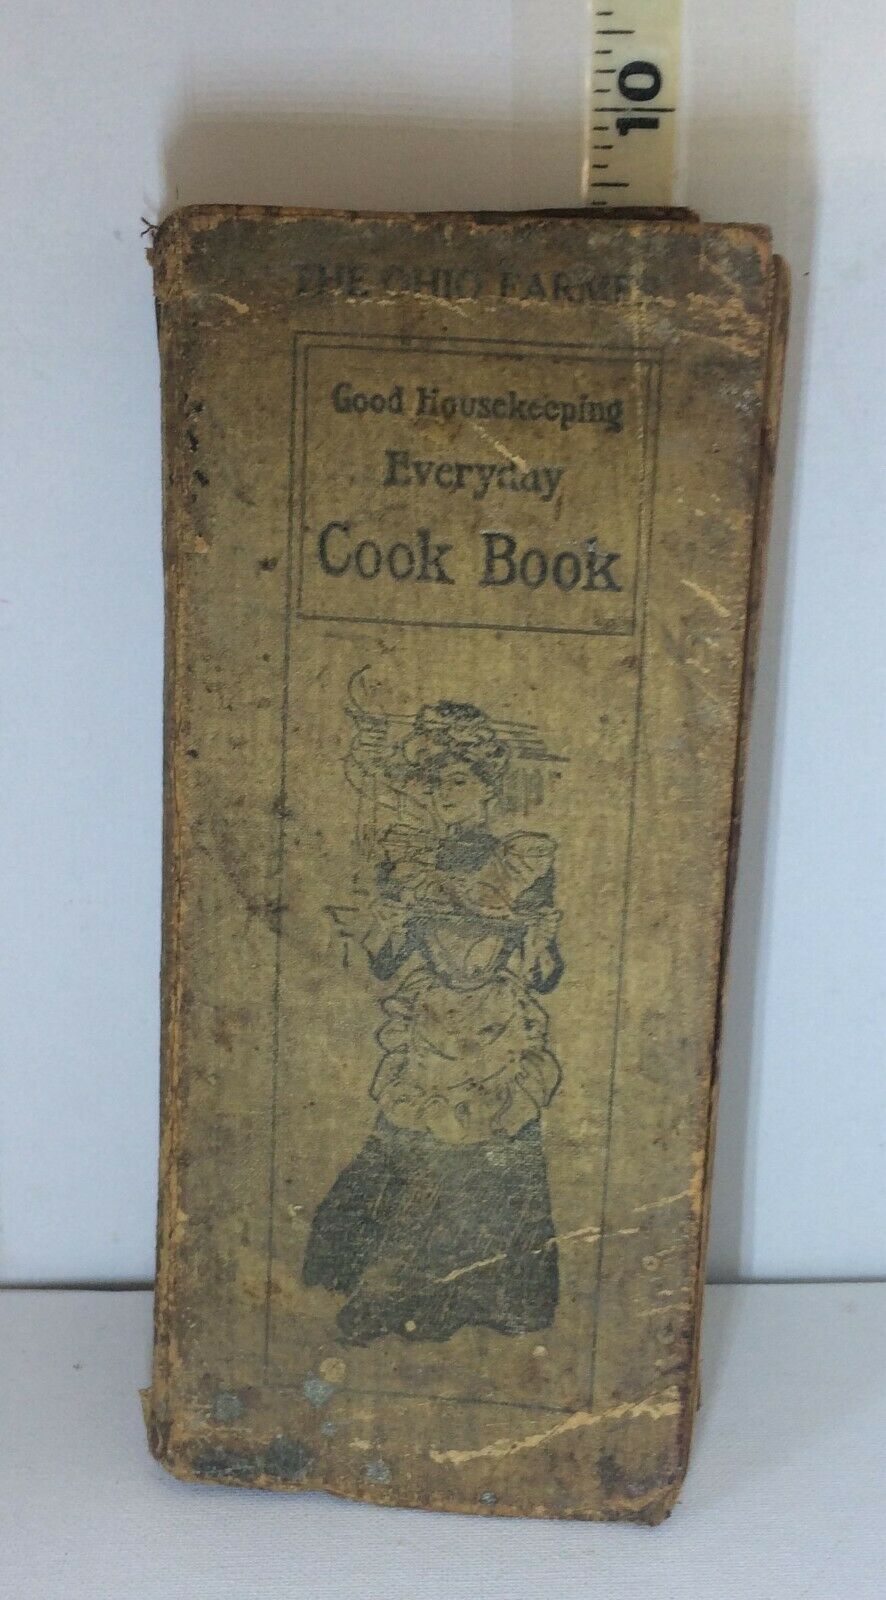 Primary image for the Ohio farmer good housekeeping everyday, CookBook  1909, Vintage Lots use yet